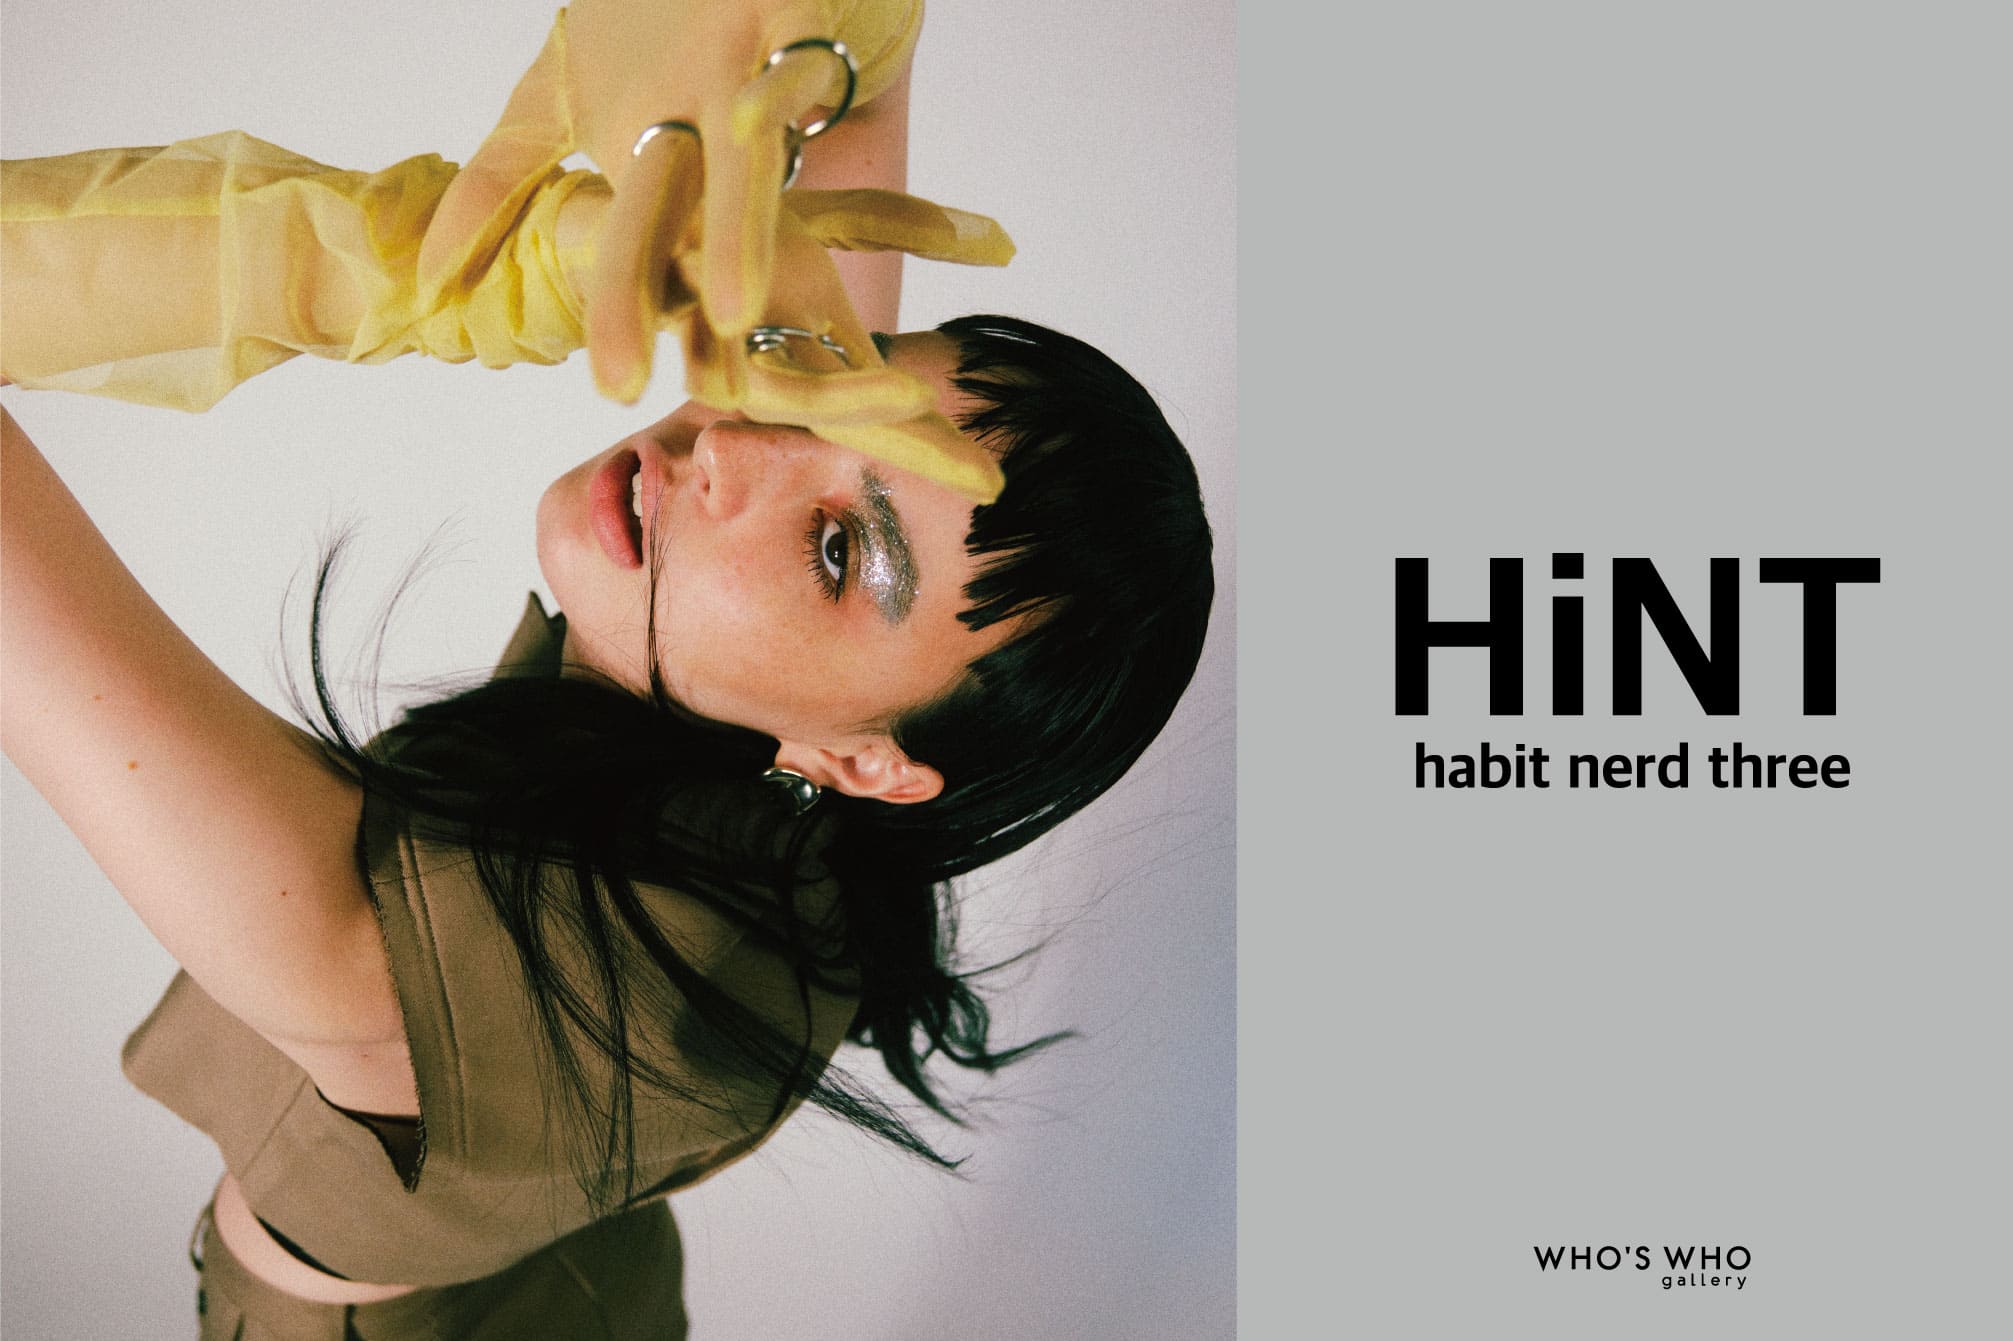 WHO’S WHO gallery NEW BRAND【HiNT】